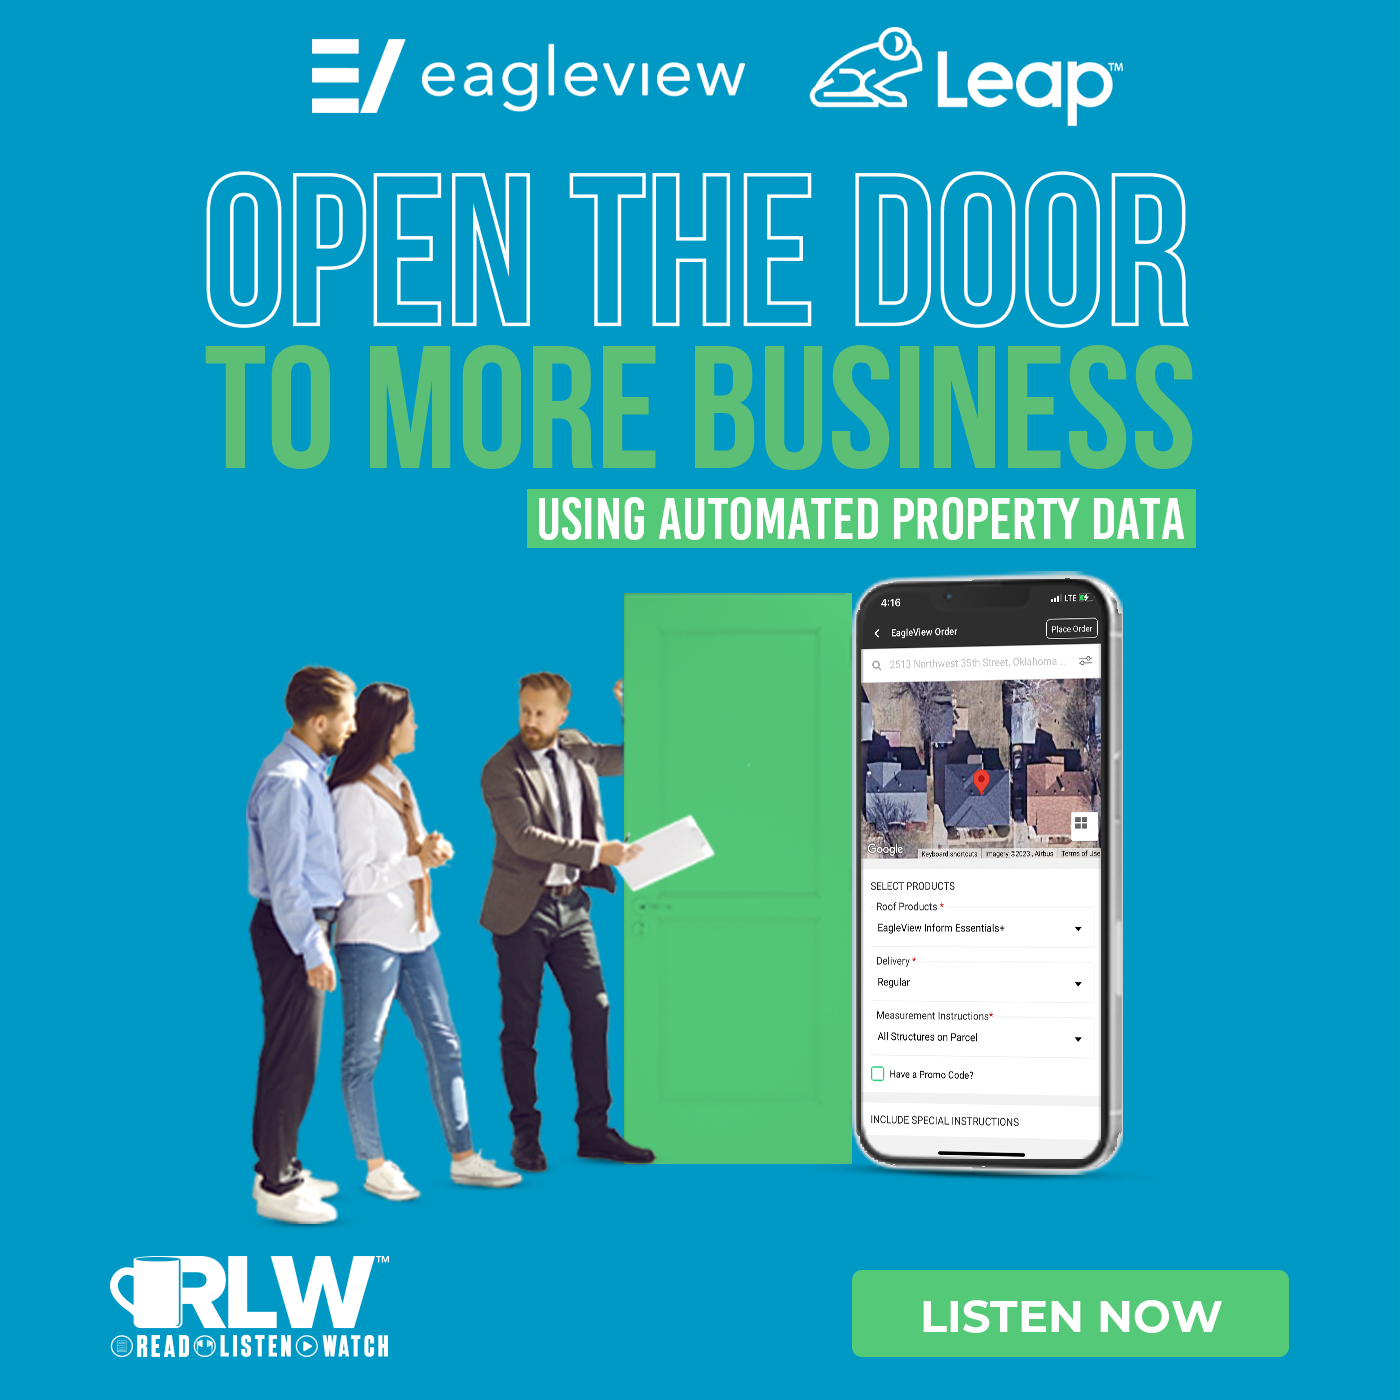 Leap/EagleView - Workflow Strategies: Automated Property Data to Win More Business with Current Customers - POD